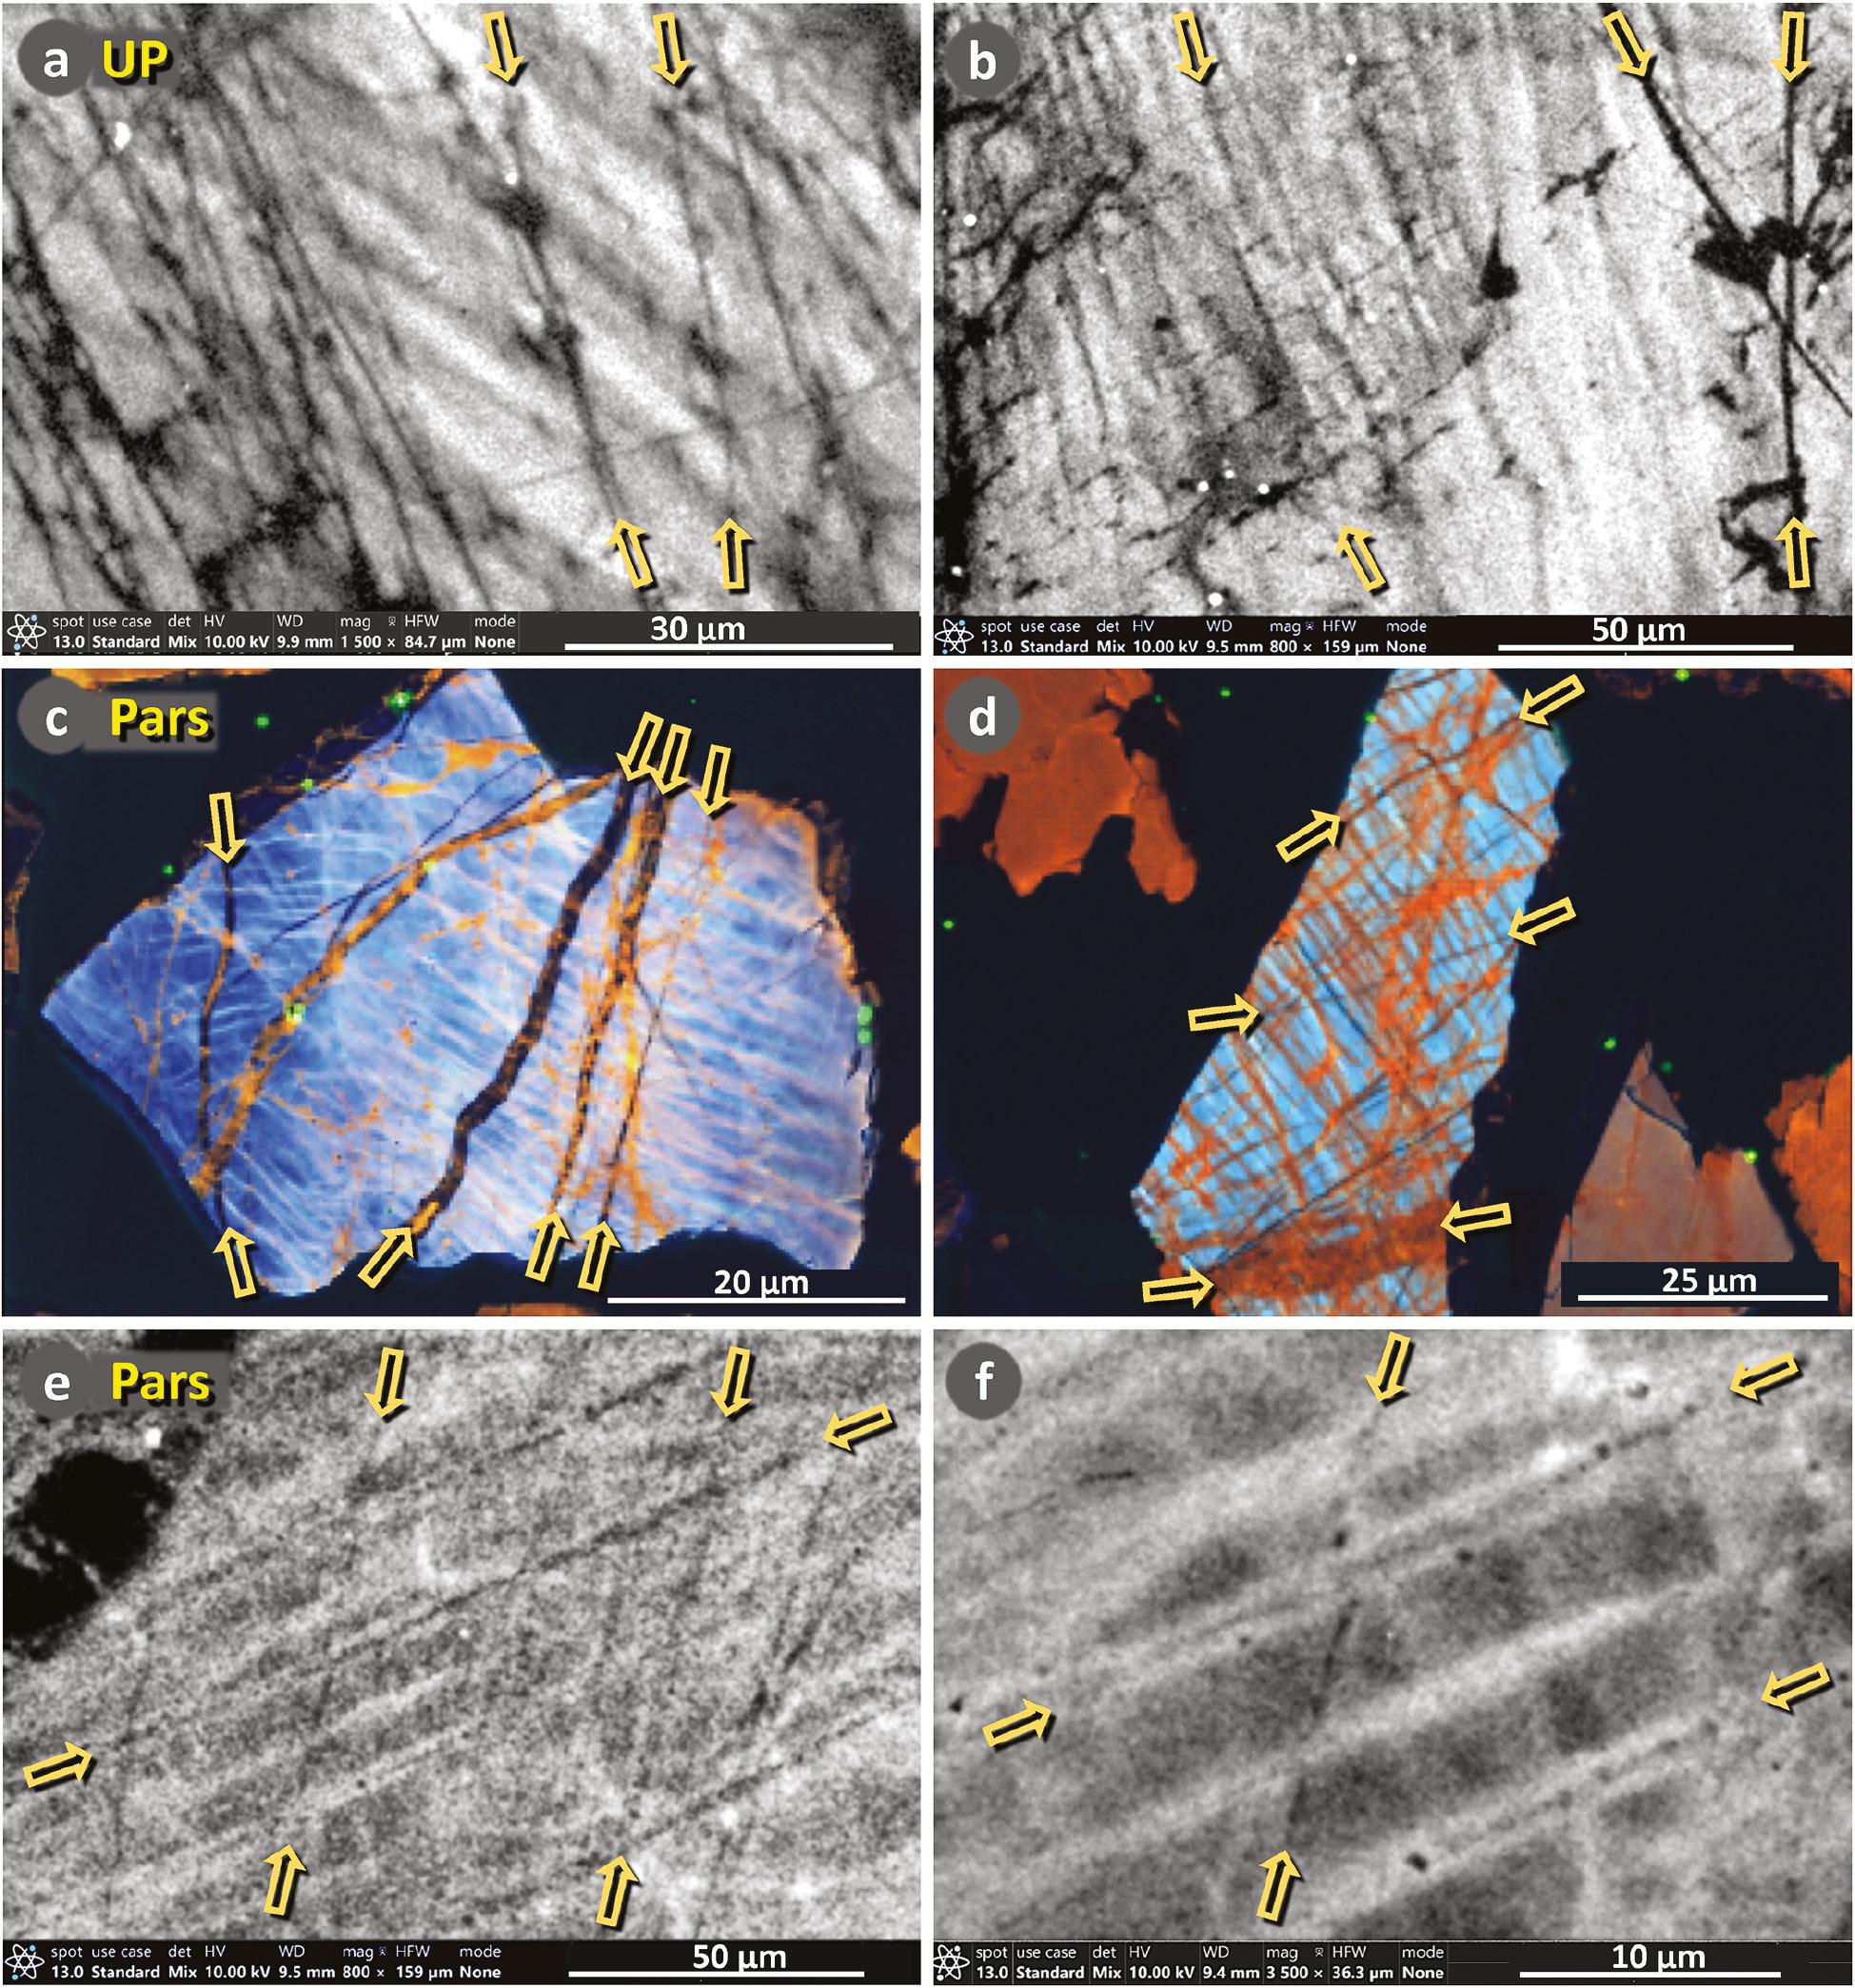 Shock-fractured quartz grains from Newtonville Site (a-b), and Parsons Island Site (d-f), and Flamingo Bay (g-i). Images were acquired using SEM-based cathodoluminescence (CL). Yellow arrows mark linear, non-luminescent black bands, commonly accepted to indicate open fractures or, in this case, amorphous material [38, 101–103]. (a) Newtonville (UP-11–13 cmbd) quartz grain 35x03. Panchromatic CL image. (b) Newtonville (UP-COA1) quartz grain 08x-03. Panchromatic CL image. (c) Pars-45 quartz grain 09x-12. Composite color (RGB) CL image. Blue represents unmelted quartz; orange represents melted quartz that has been annealed; black represents fractures filled with amorphous silica. Note that the fractures in this grain radiate from the area at the upper right, potentially resulting from a high-pressure collision with another grain. (d) Pars-45 quartz grain 07x06. Composite color (RGB) CL image. (e-f) Pars-45 quartz grain 22x12. Panchromatic CL image.